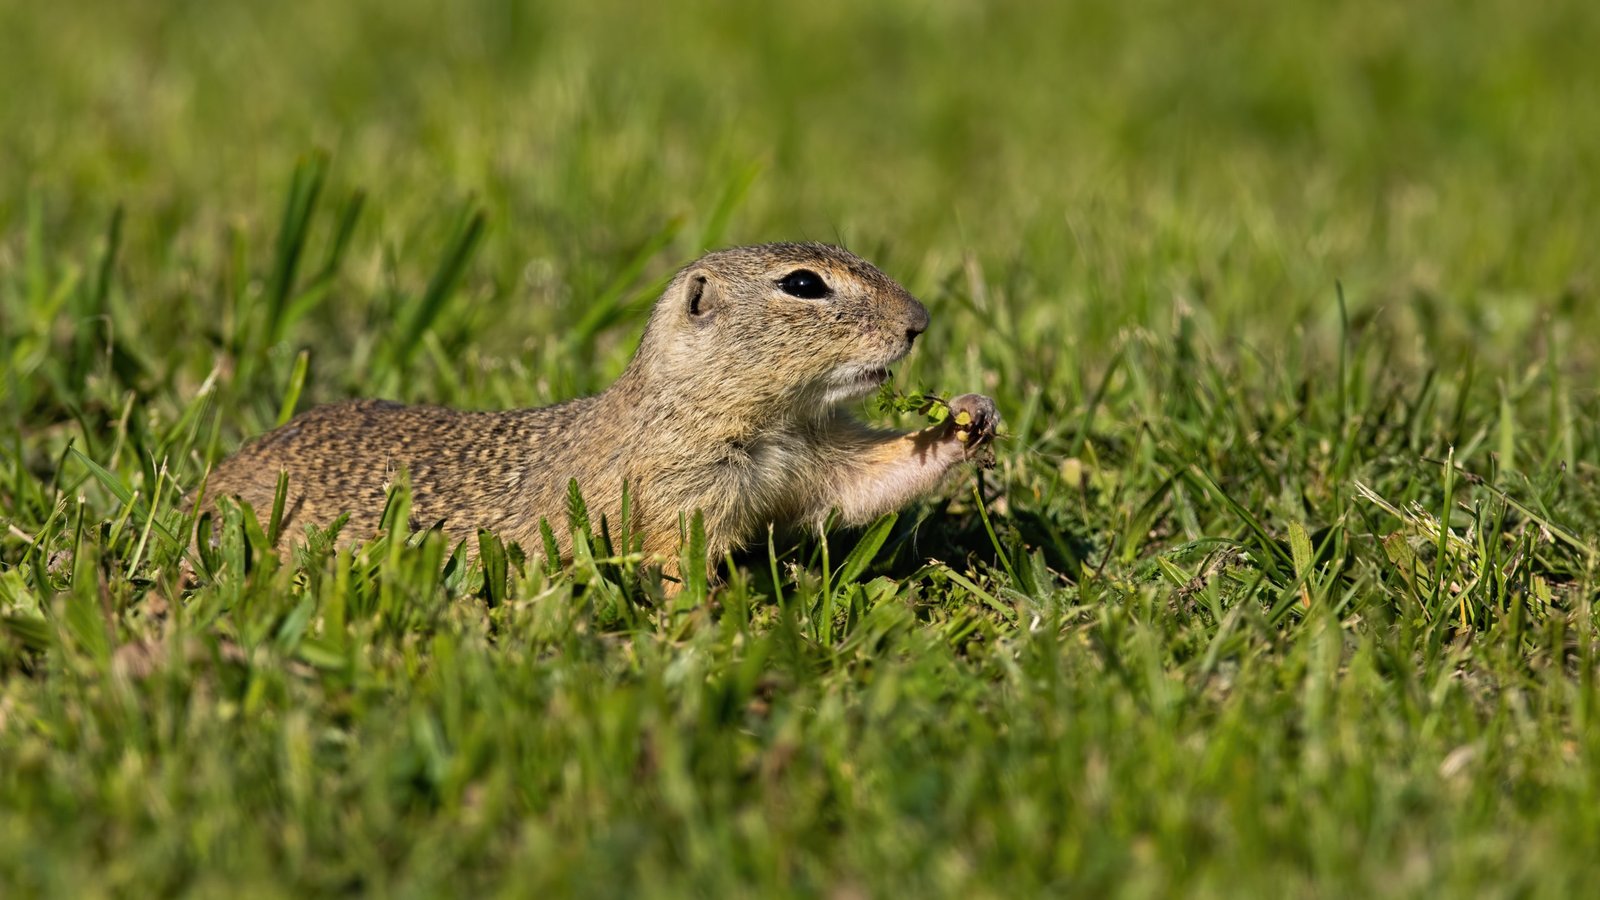 Image of a ground squirrel feeding on grass